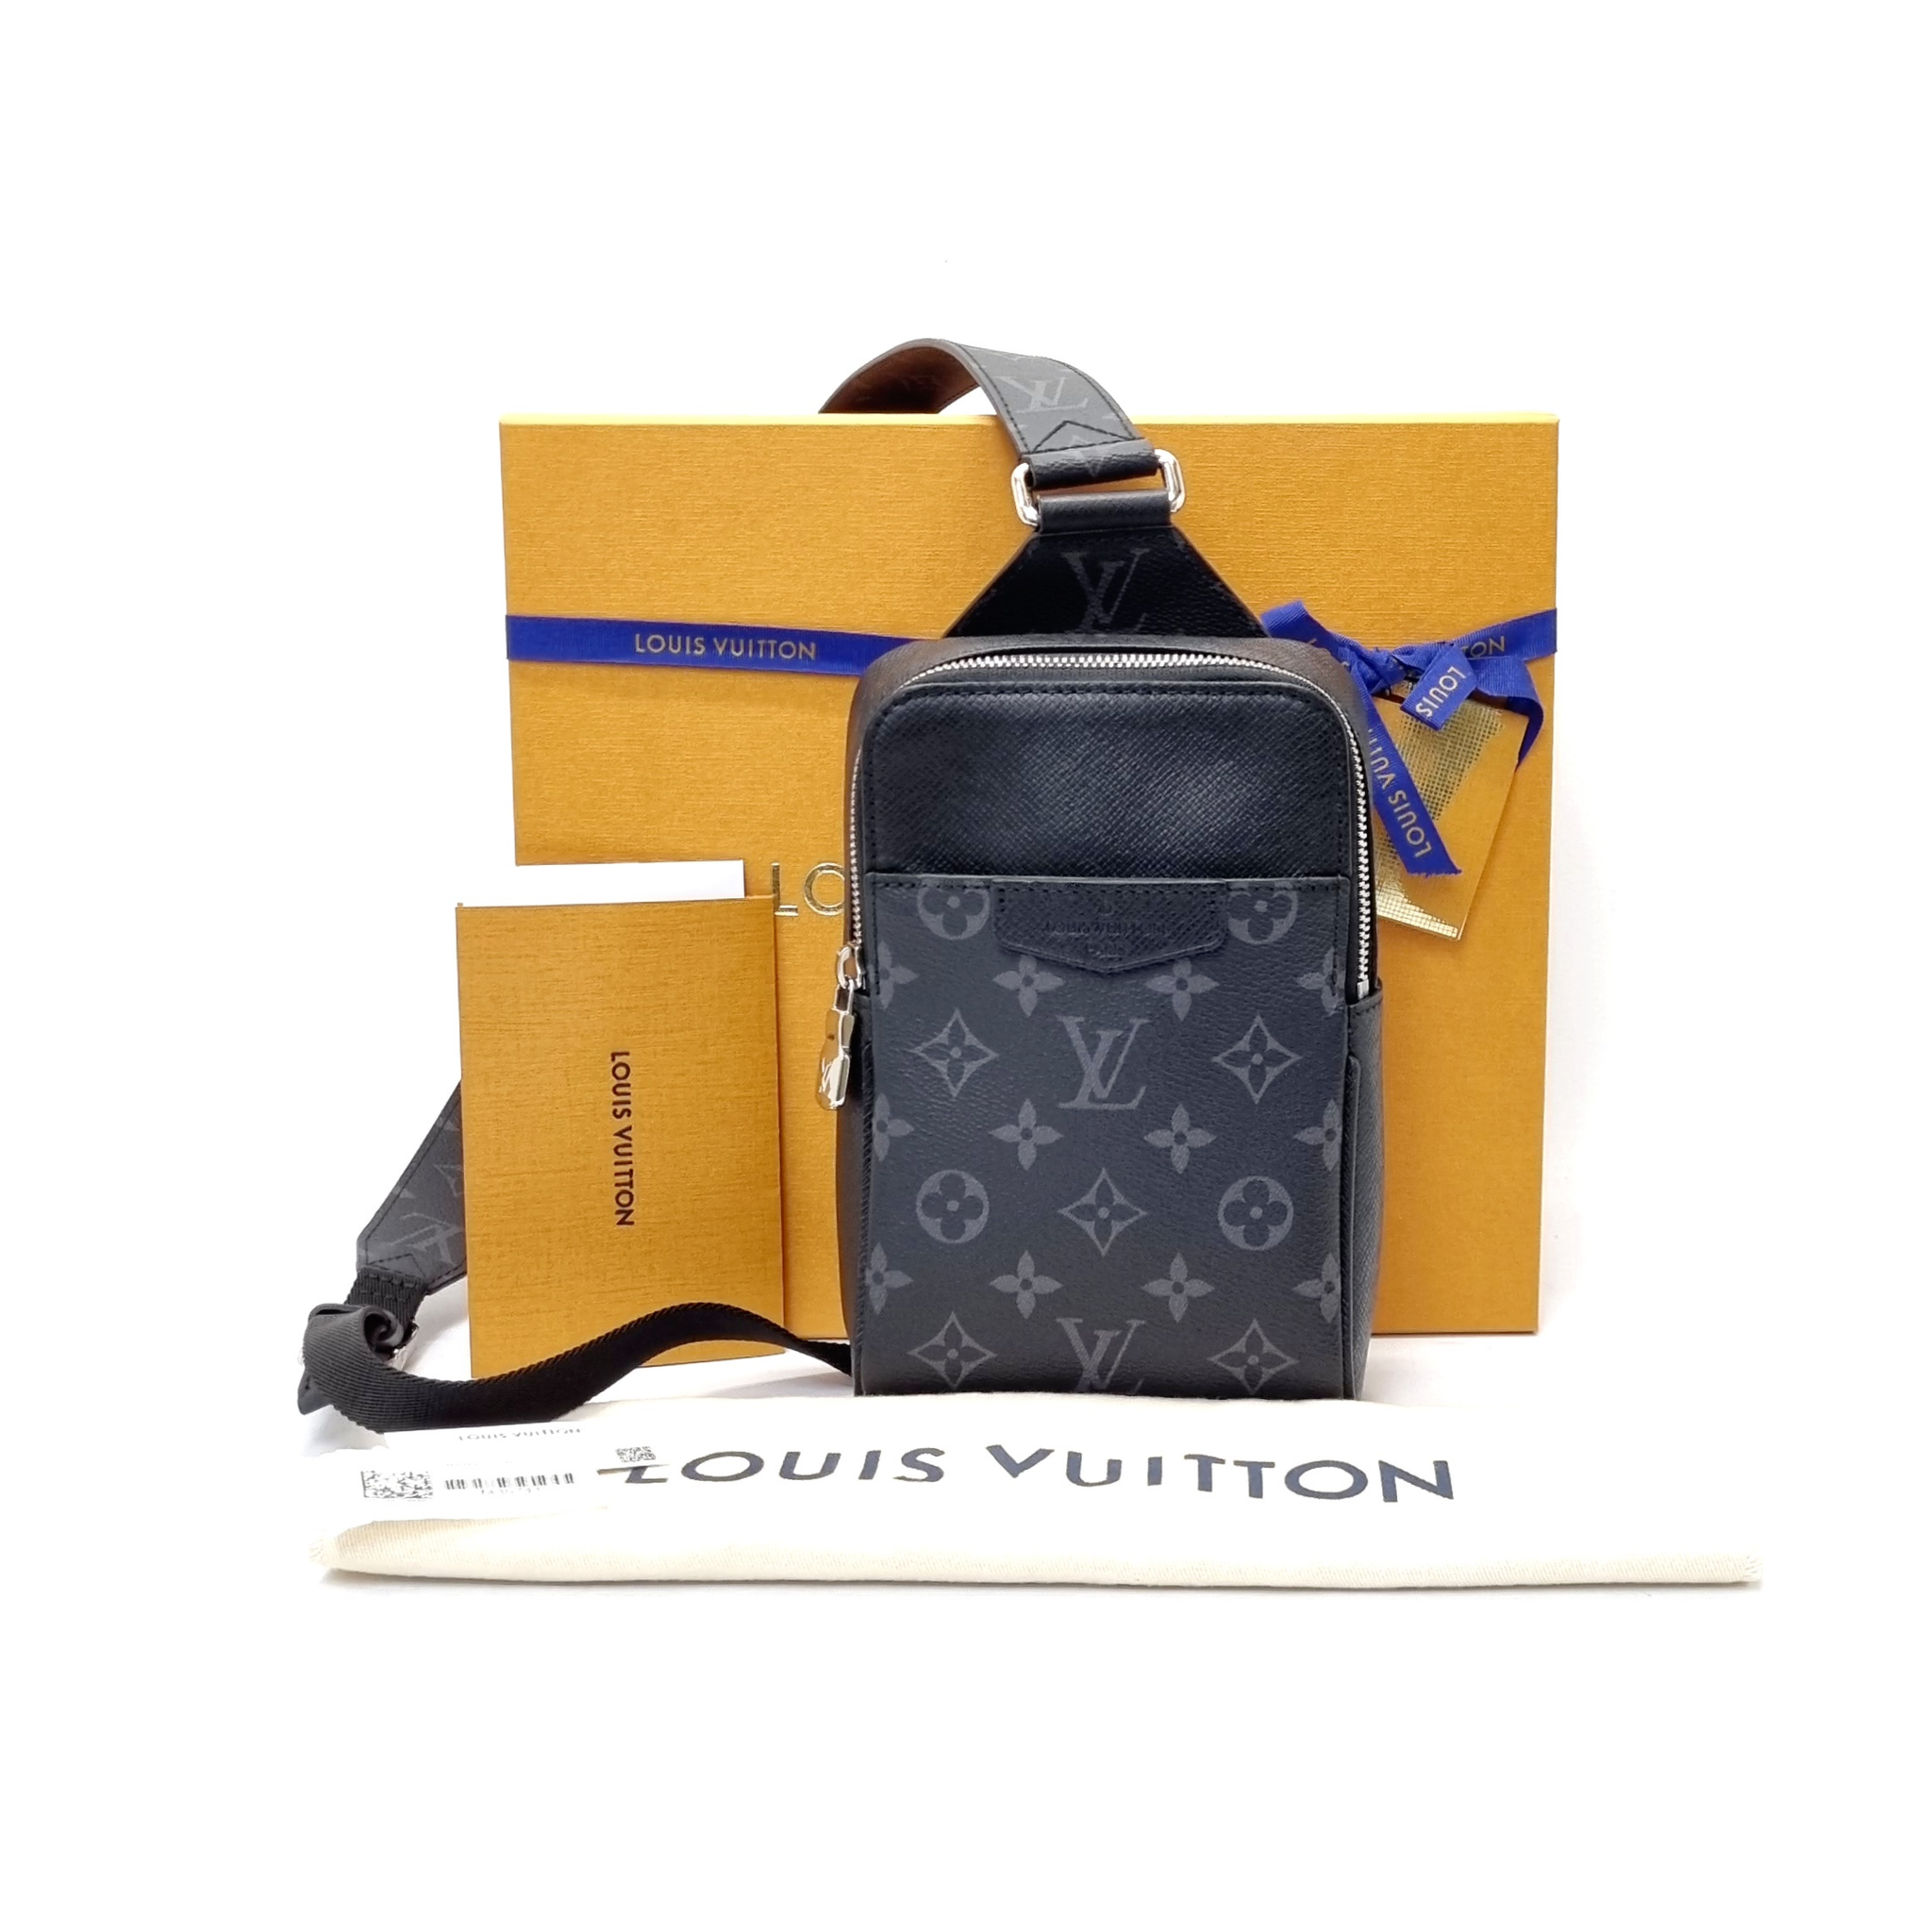 LOUIS VUITTON Outdoor Sling Bag l Limited Edition l Taigarama Collection  2021 l UNBOXING l REVIEW  YouTube